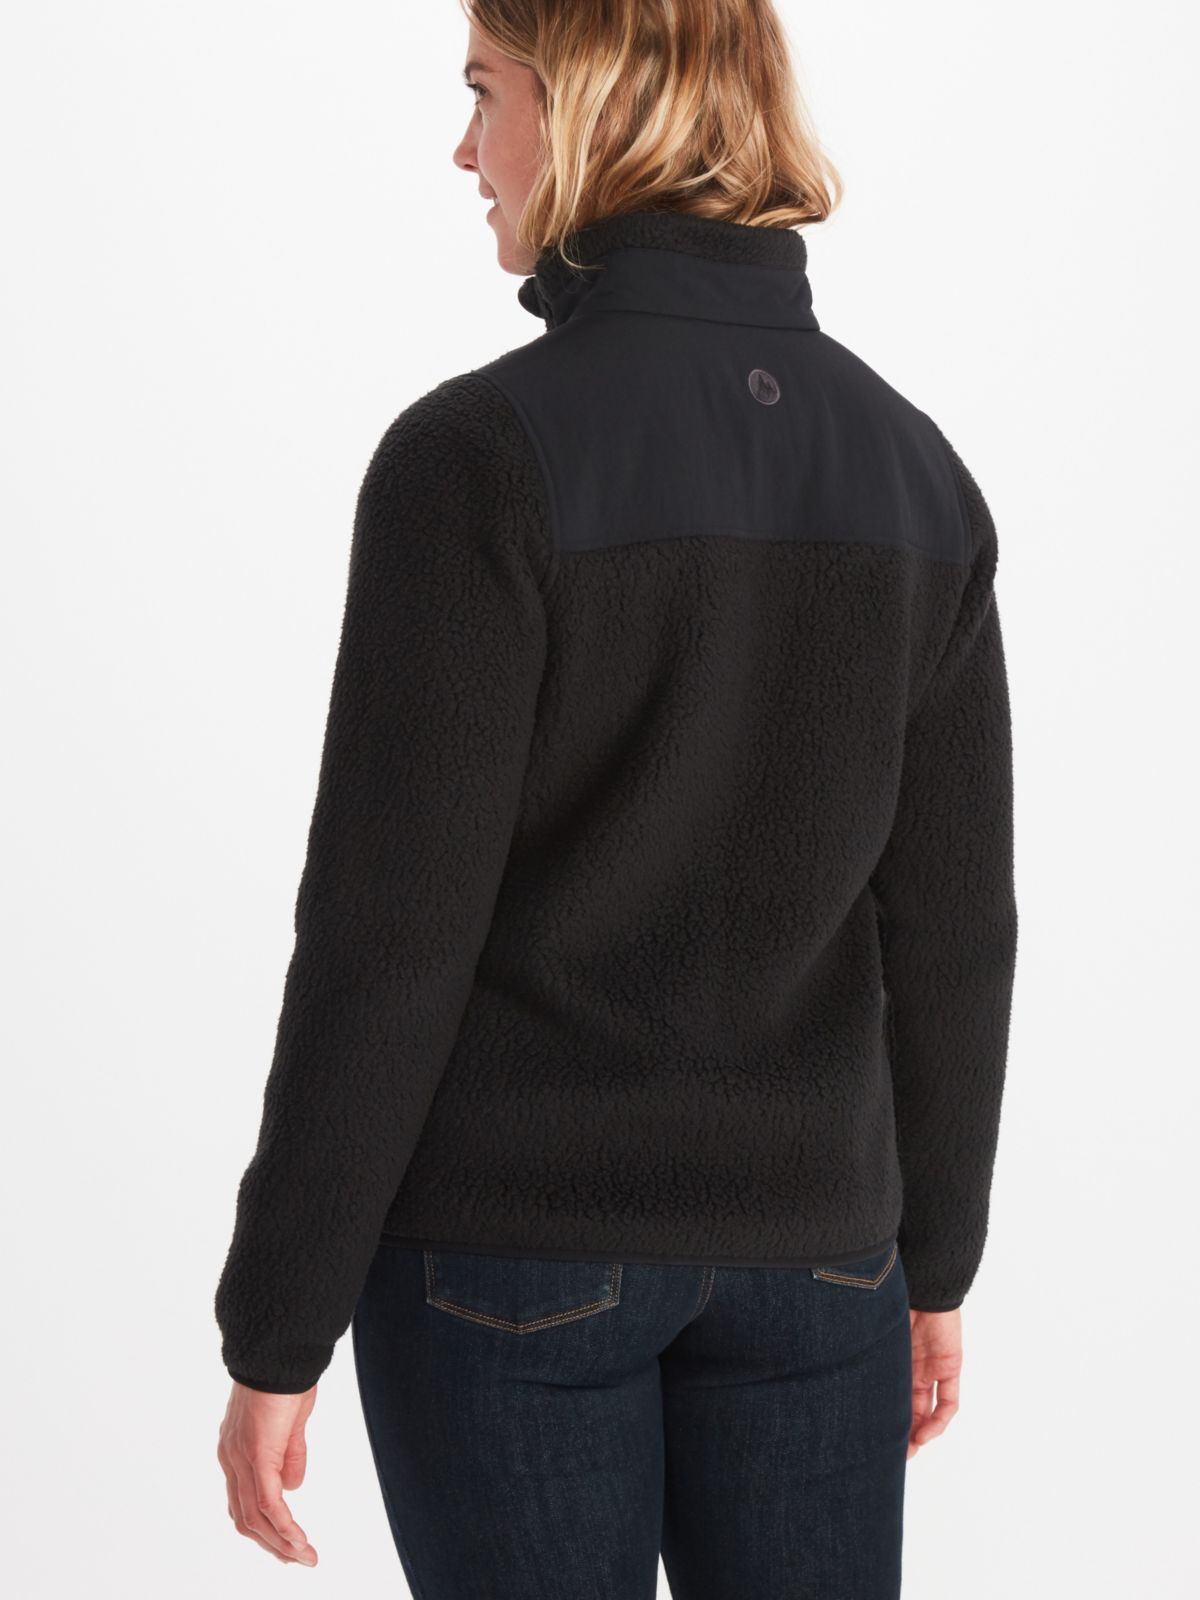 womens pullover behind view